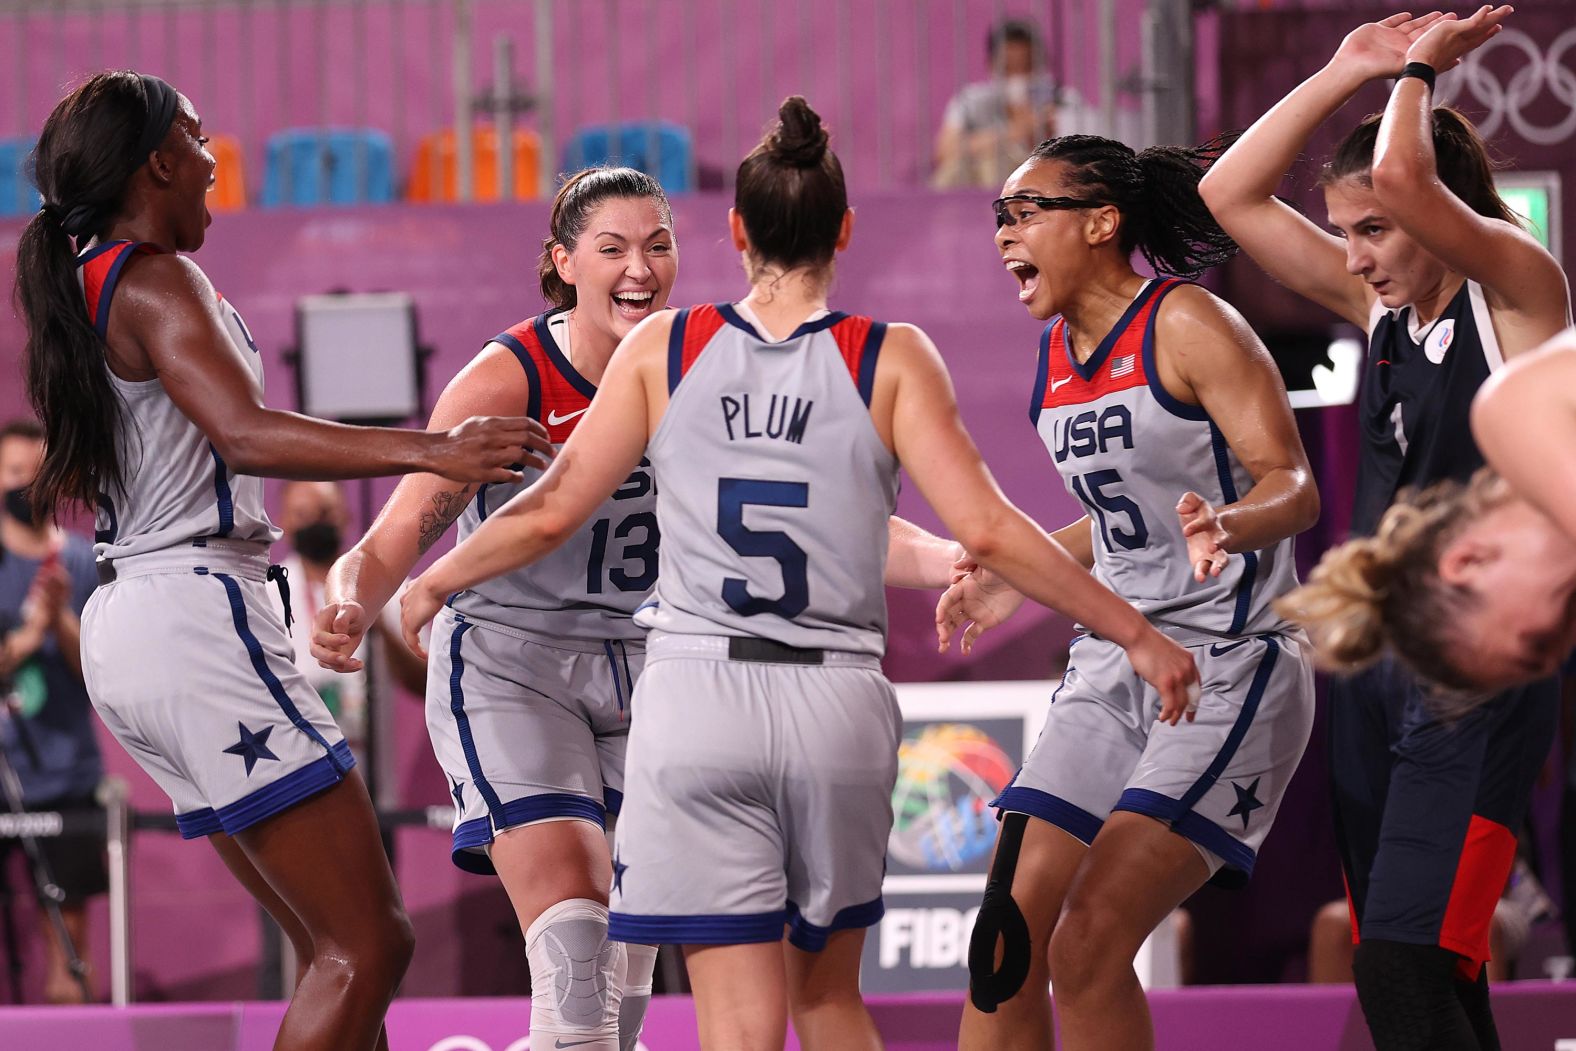 From left, Jacquelyn Young, Stefanie Dolson, Kelsey Plum and Allisha Gray celebrate after <a href="index.php?page=&url=https%3A%2F%2Fwww.cnn.com%2Fworld%2Flive-news%2Ftokyo-2020-olympics-07-28-21-spt%2Fh_8aba5e07f9b1531a79bd7533f8c4ecc8" target="_blank">they won gold in 3-on-3 basketball</a> on July 28. This was the first year that 3-on-3 was an Olympic event.